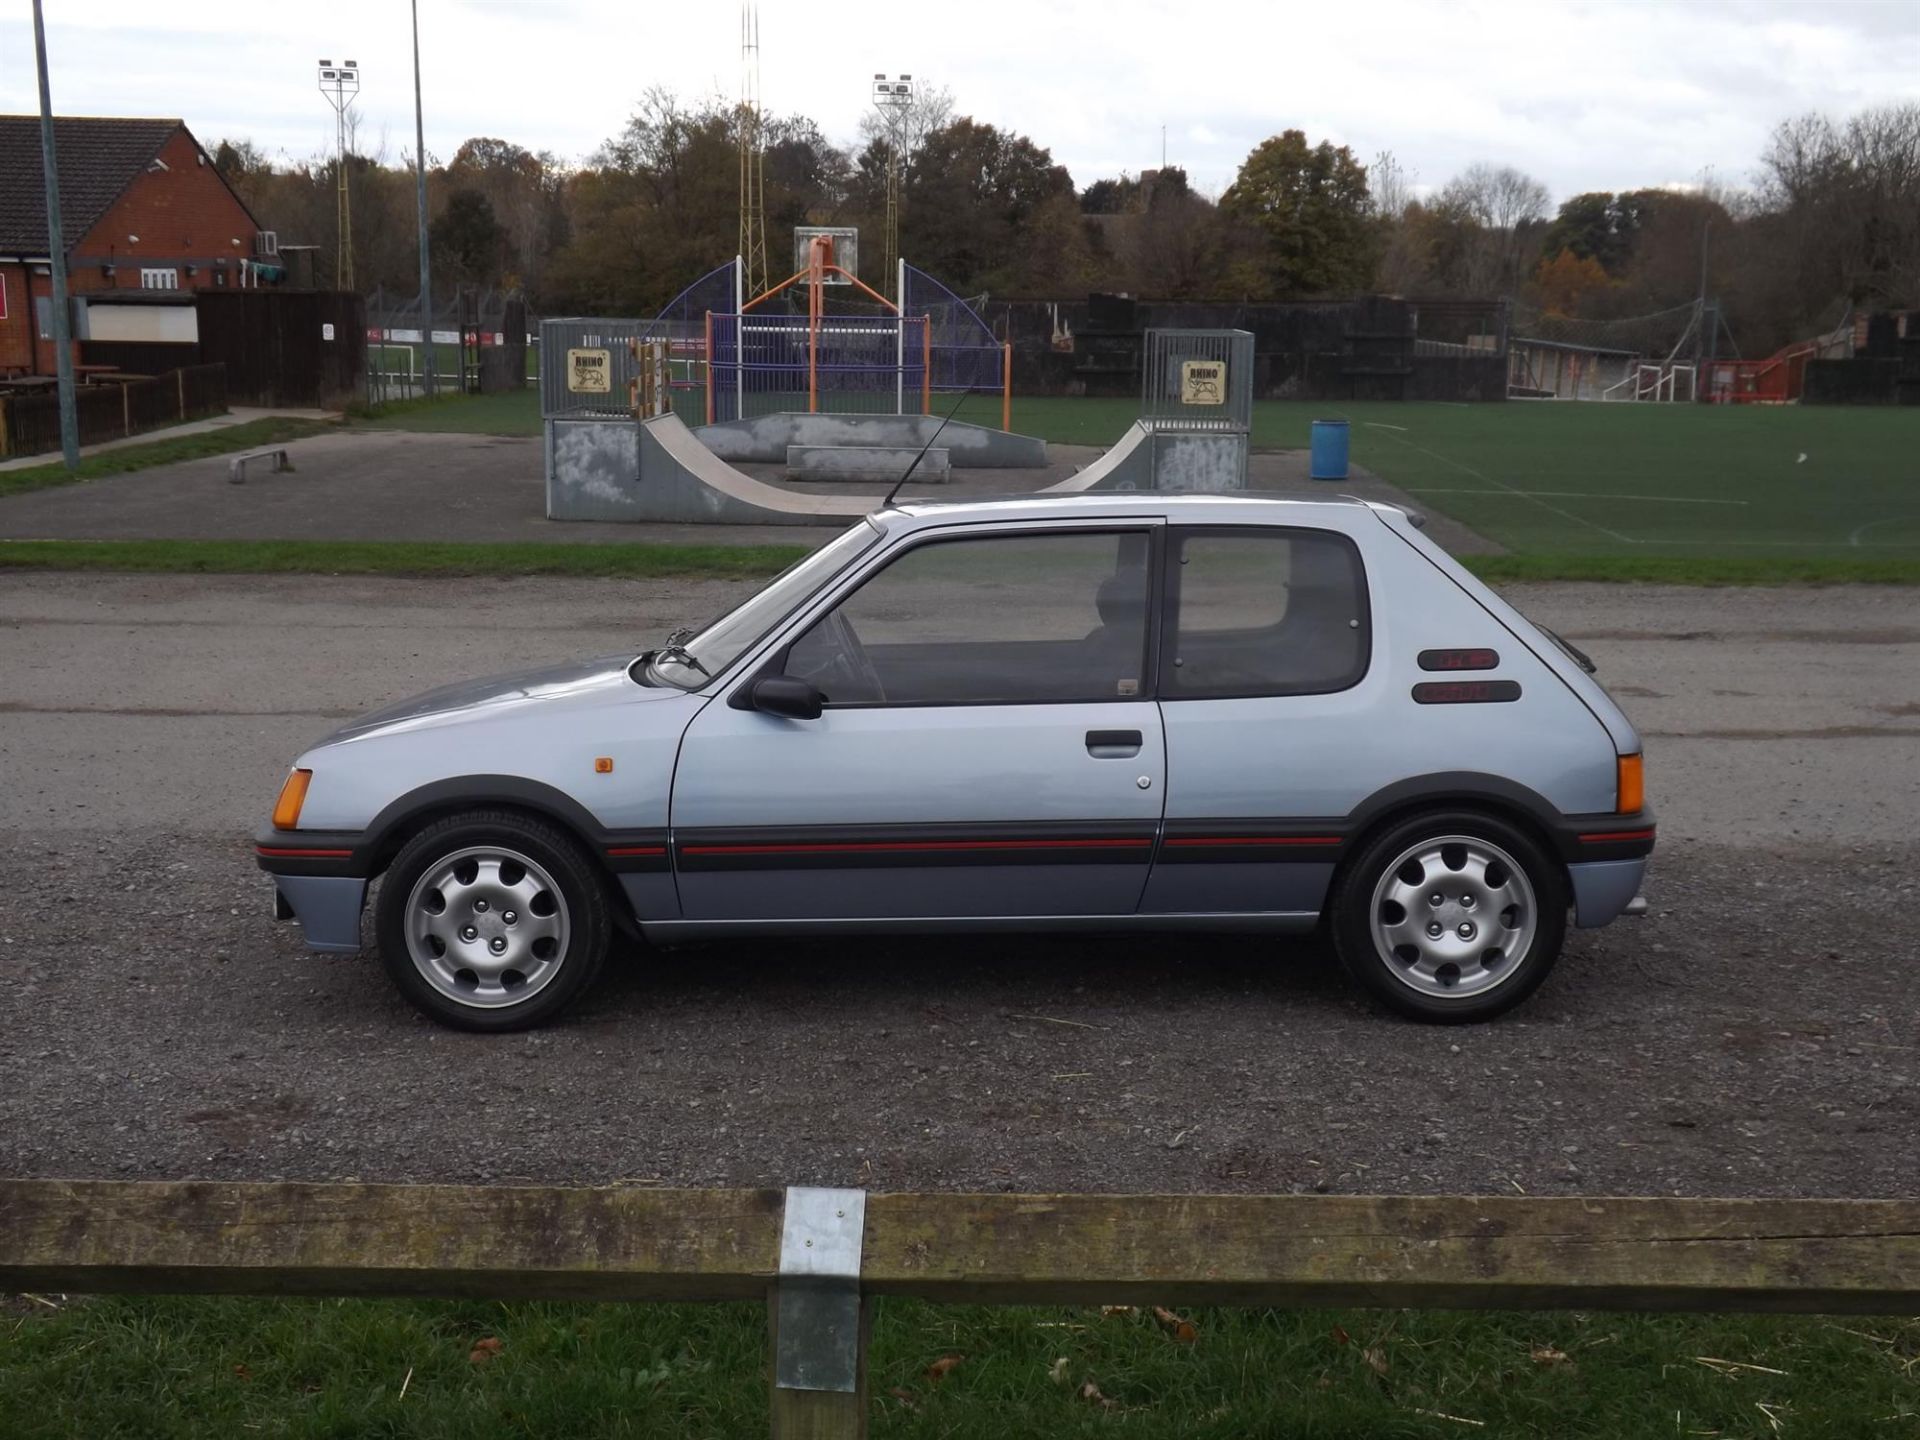 1990 Peugeot 205 GTi 1.6 (Phase 2) - Image 9 of 10